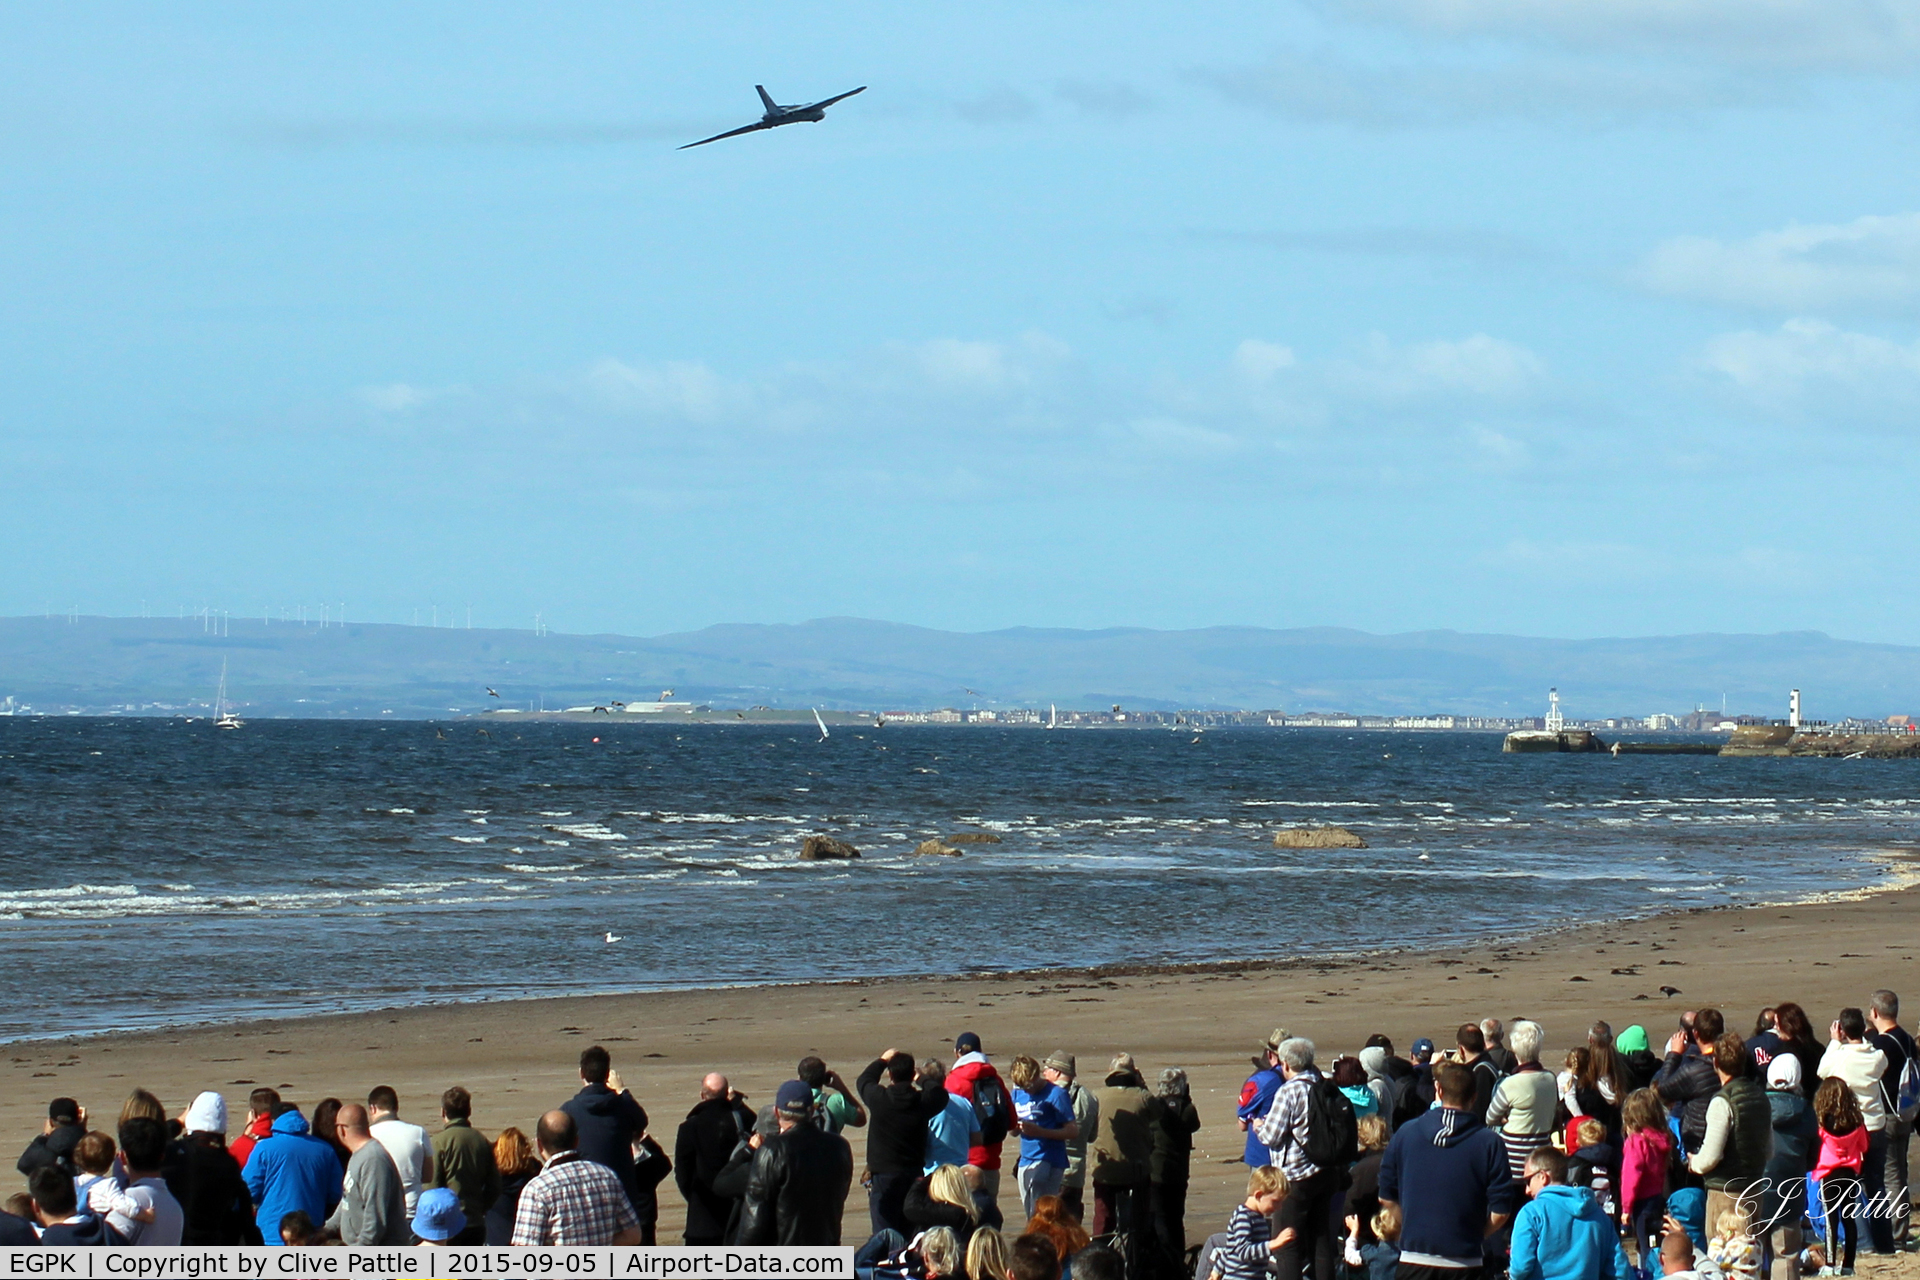 Glasgow Prestwick International Airport, Glasgow, Scotland United Kingdom (EGPK) - Avro Vulcan XH558/G-VLCN displaying in Scotland for the last time, to a crowd of 120,000, at the Scottish Airshow 2015, held at Ayr seafront and Prestwick Airport EGPK